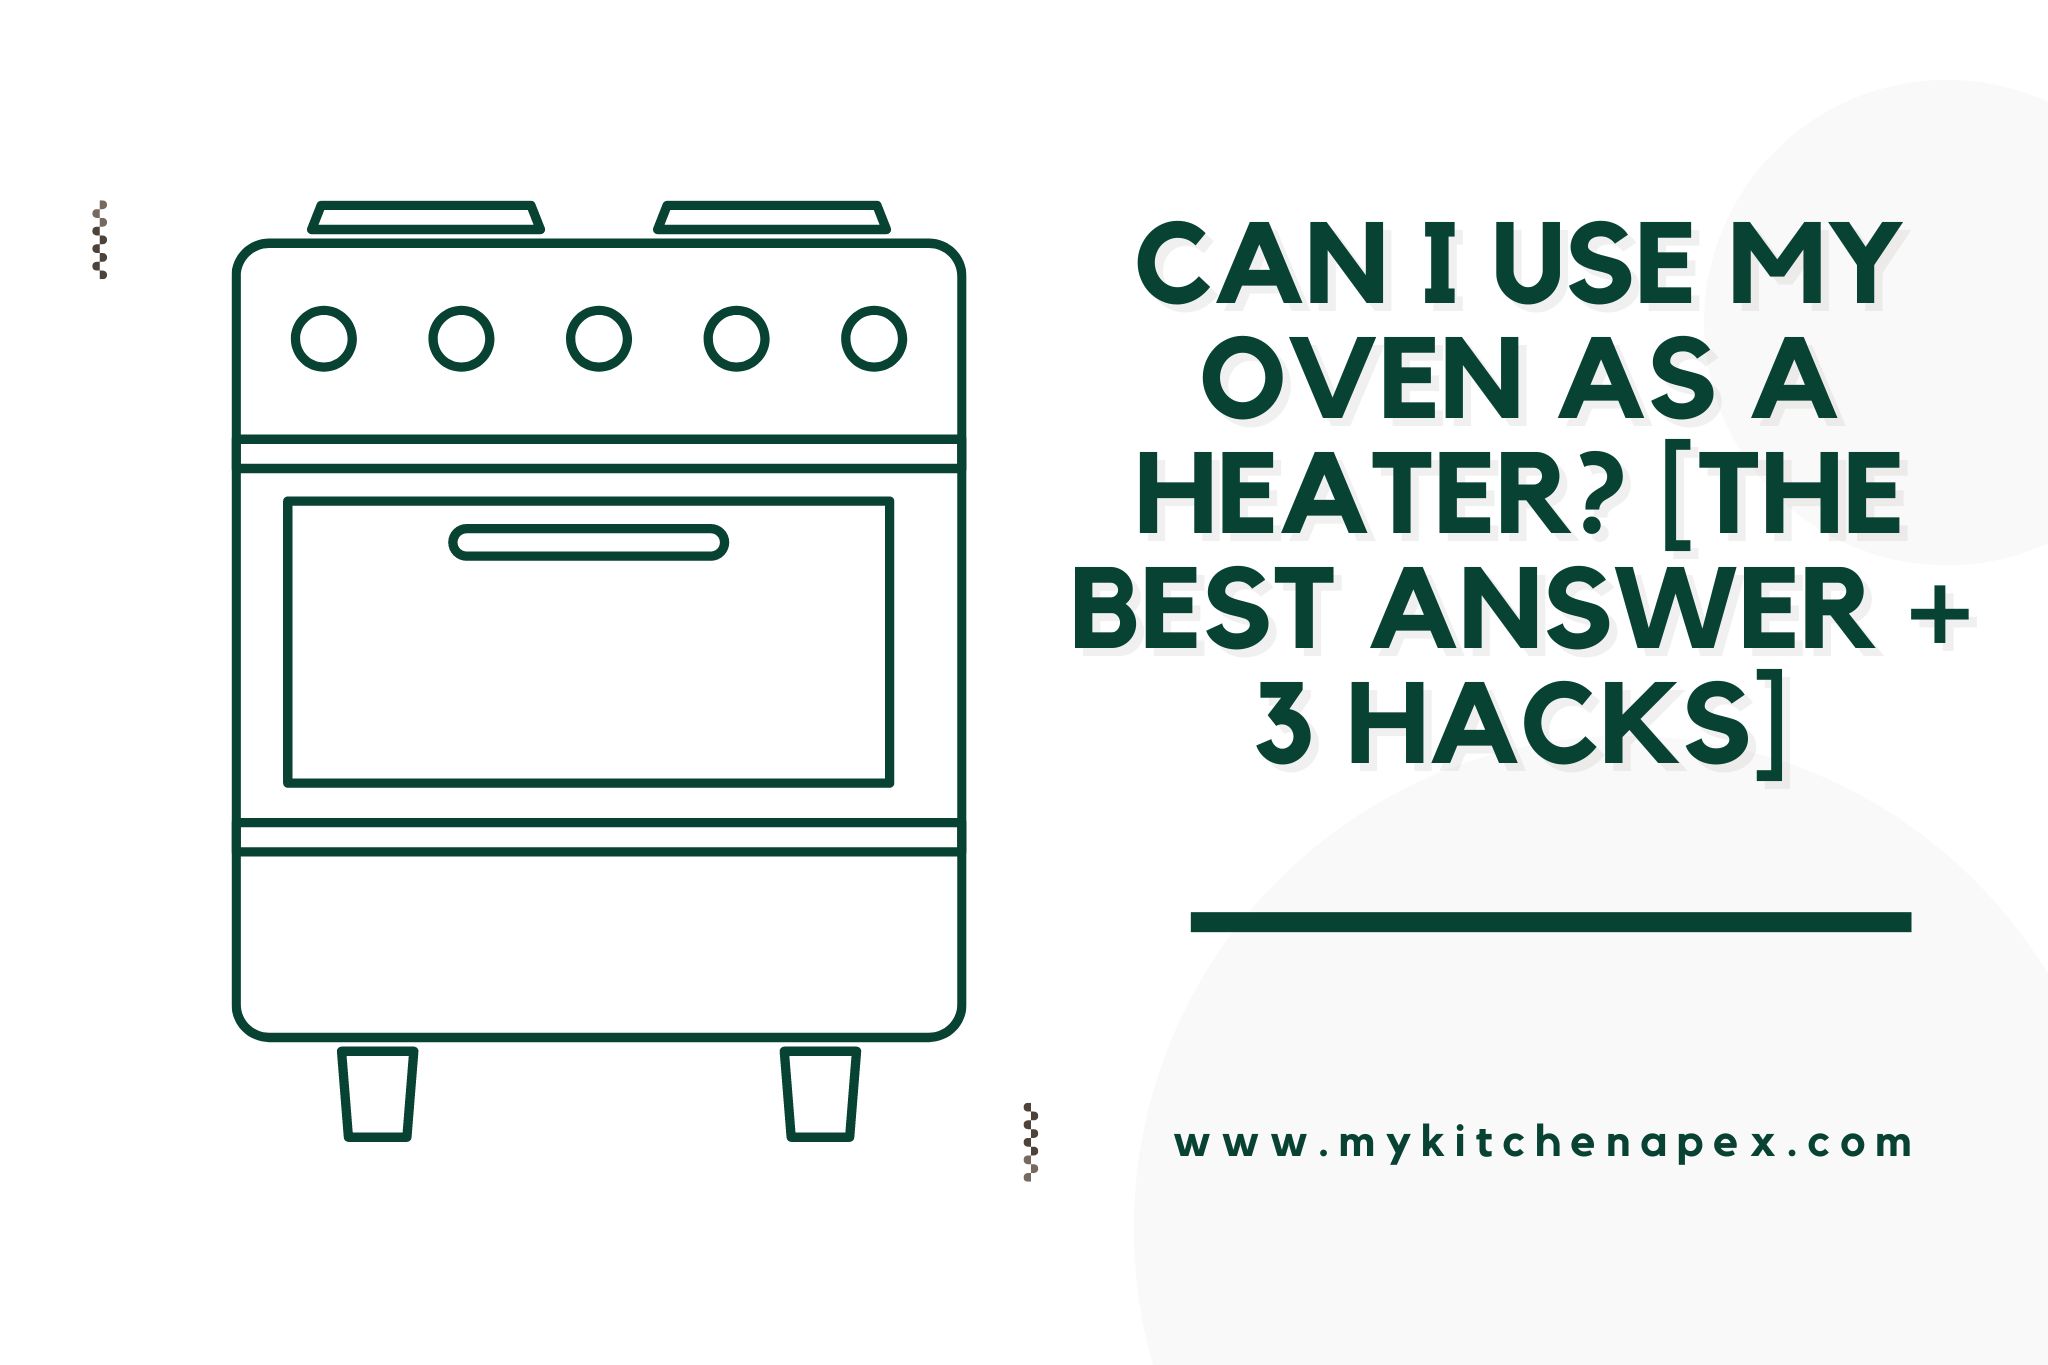 Can I Use My Oven As A Heater? [The BEST Answer + 3 Hacks]